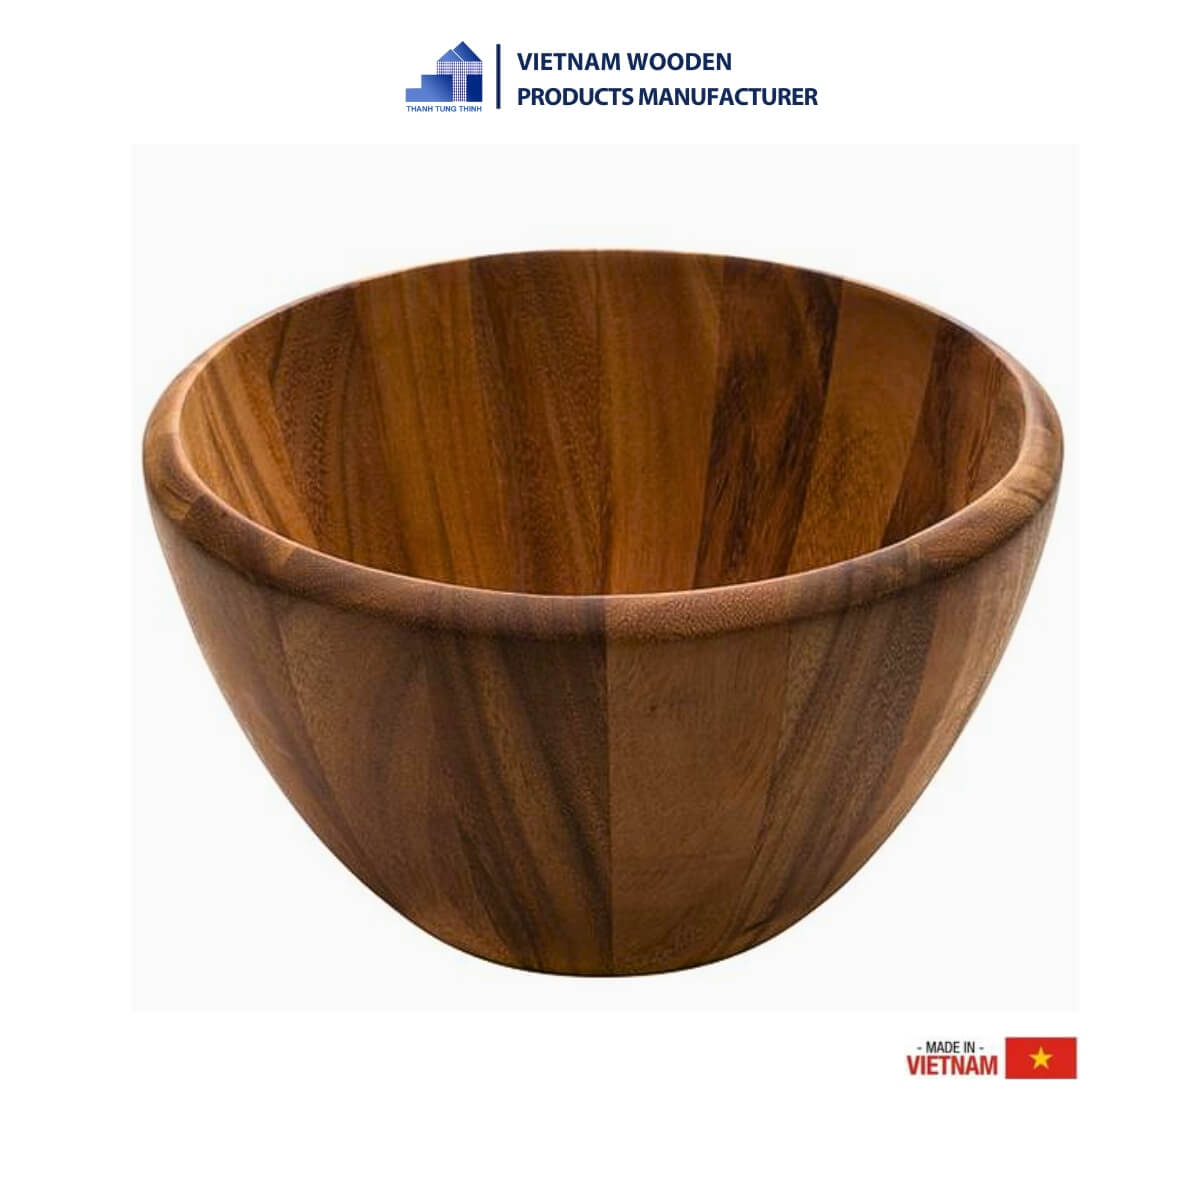 Safe Wooden Bowl for Consumers